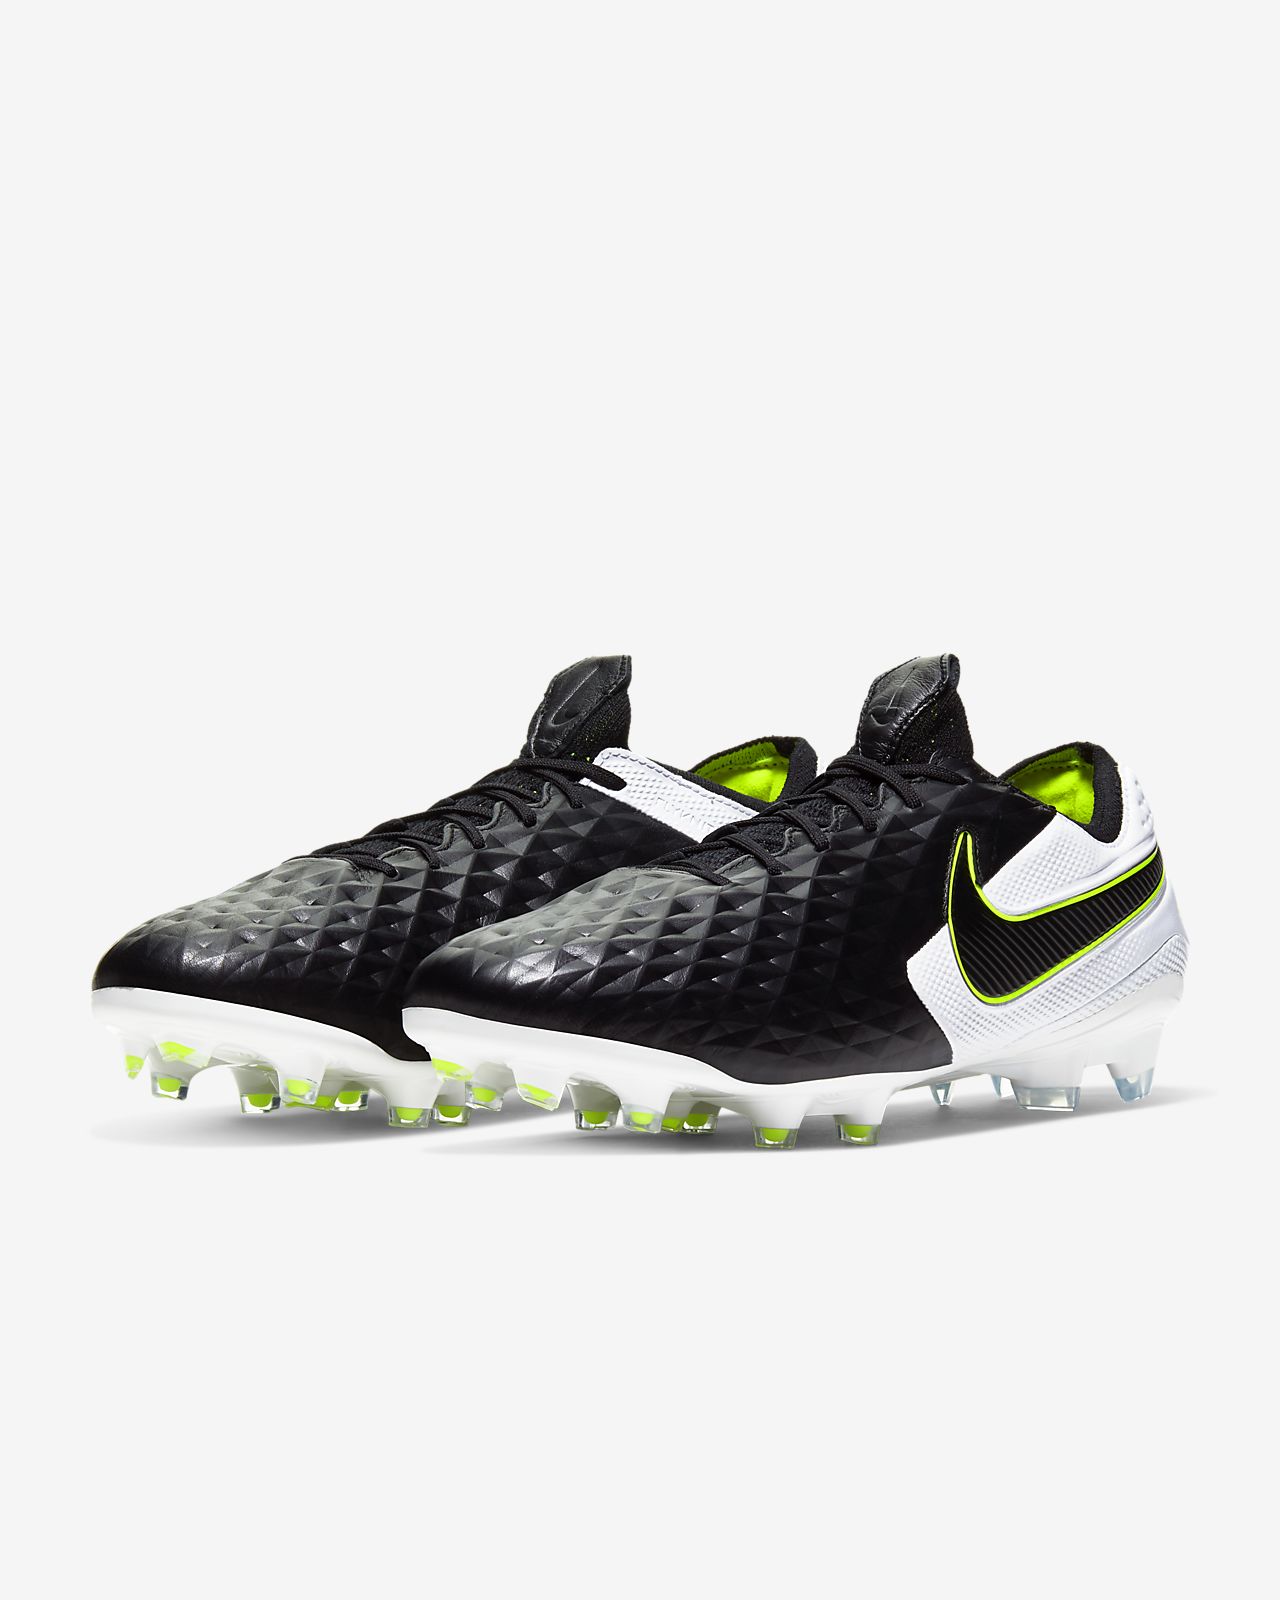 Nike Legend 8 Club TF AT6109 004 shoe boots.